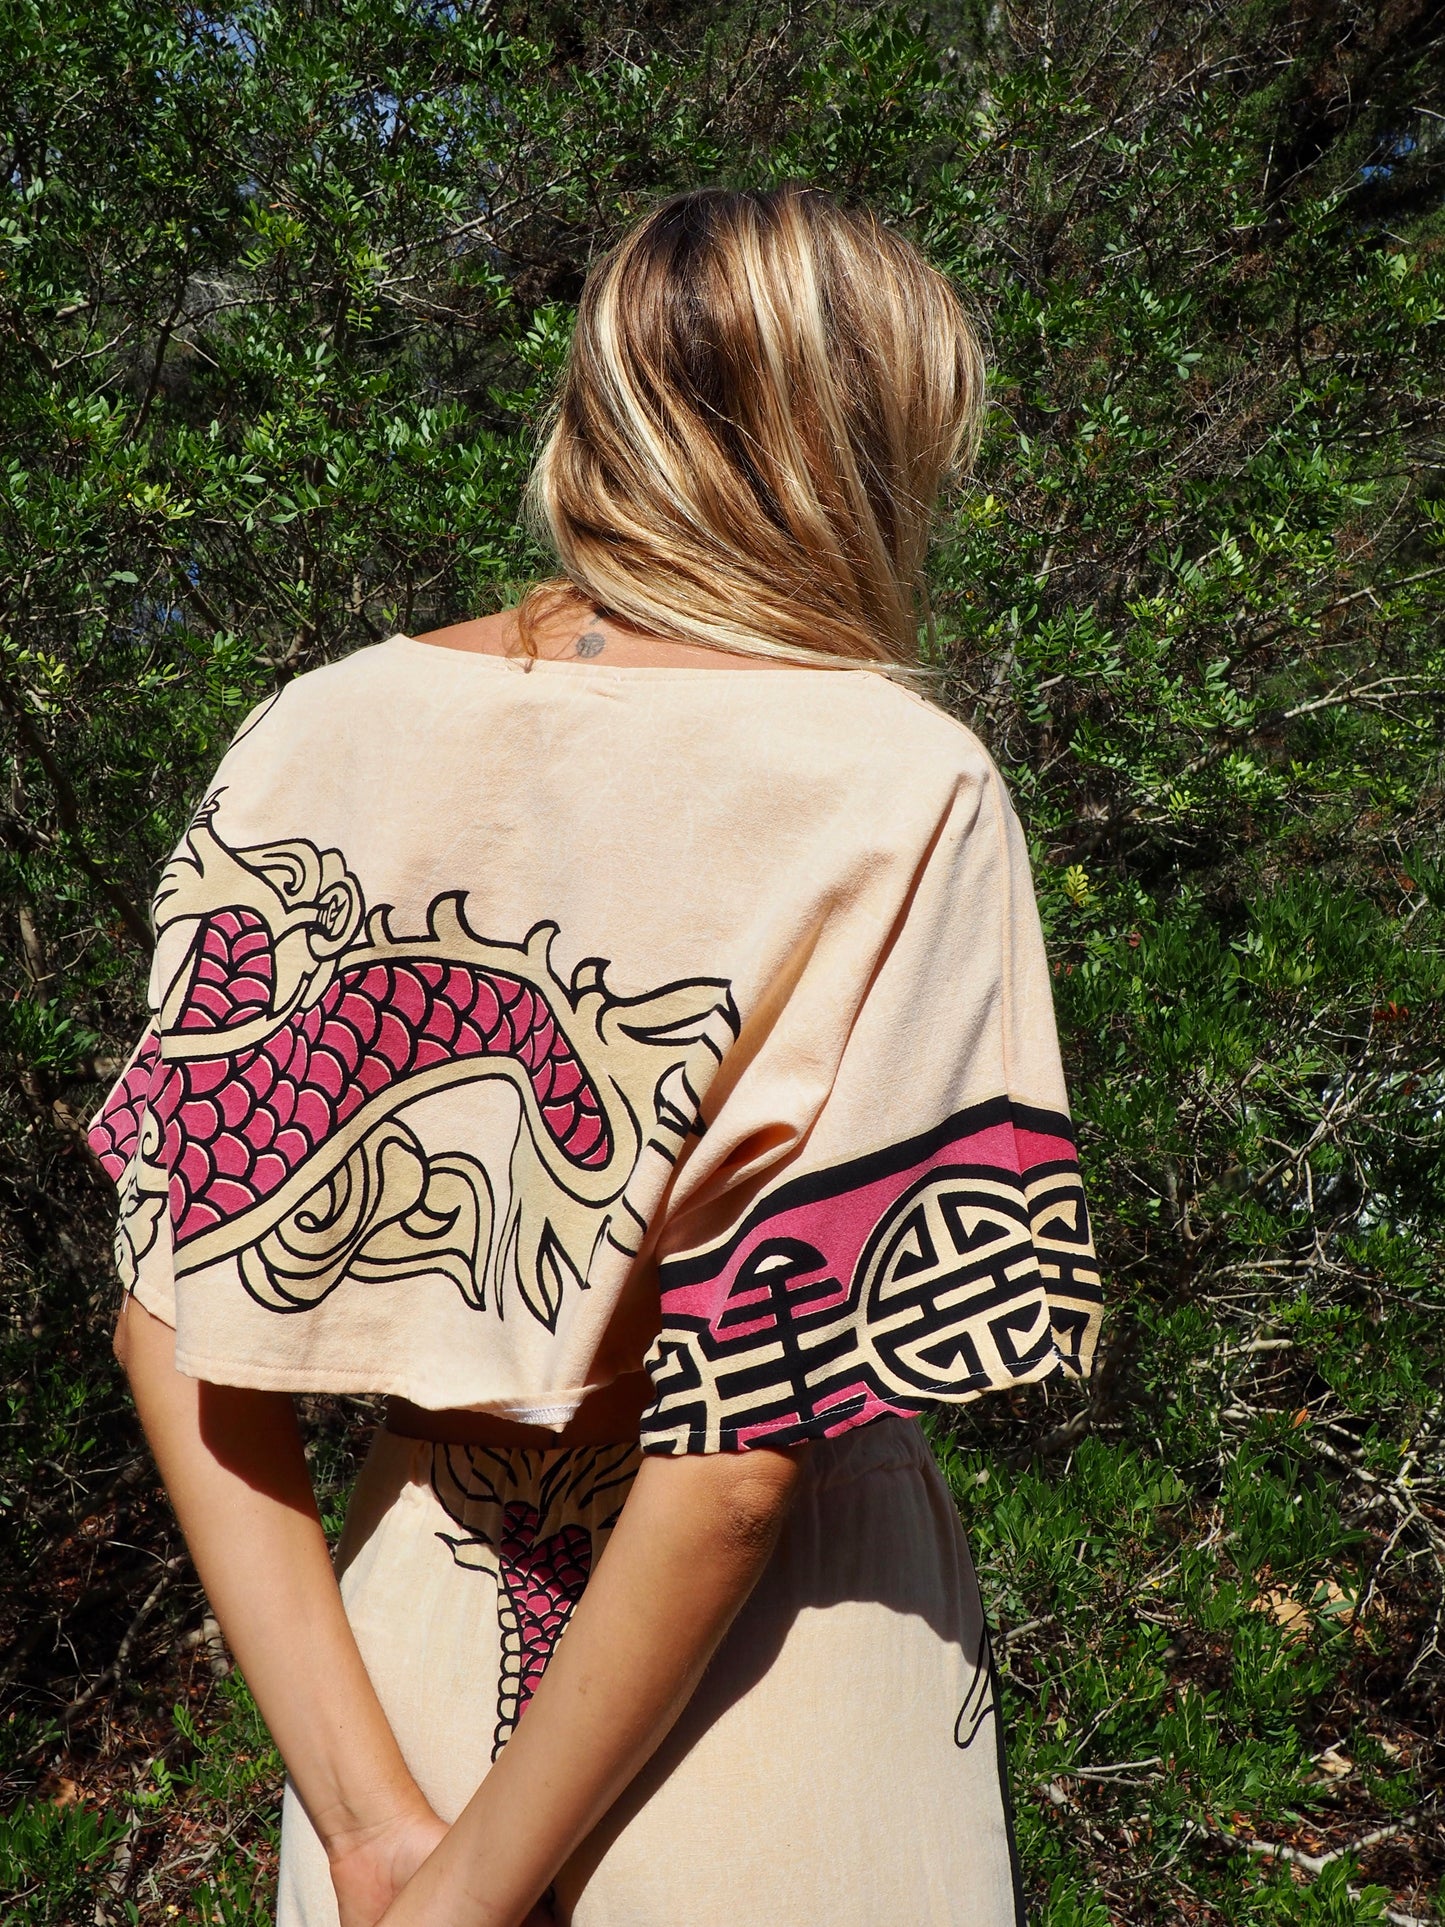 Up-cycled vintage cotton top cream and pink with dragon design by Vagabond Ibiza